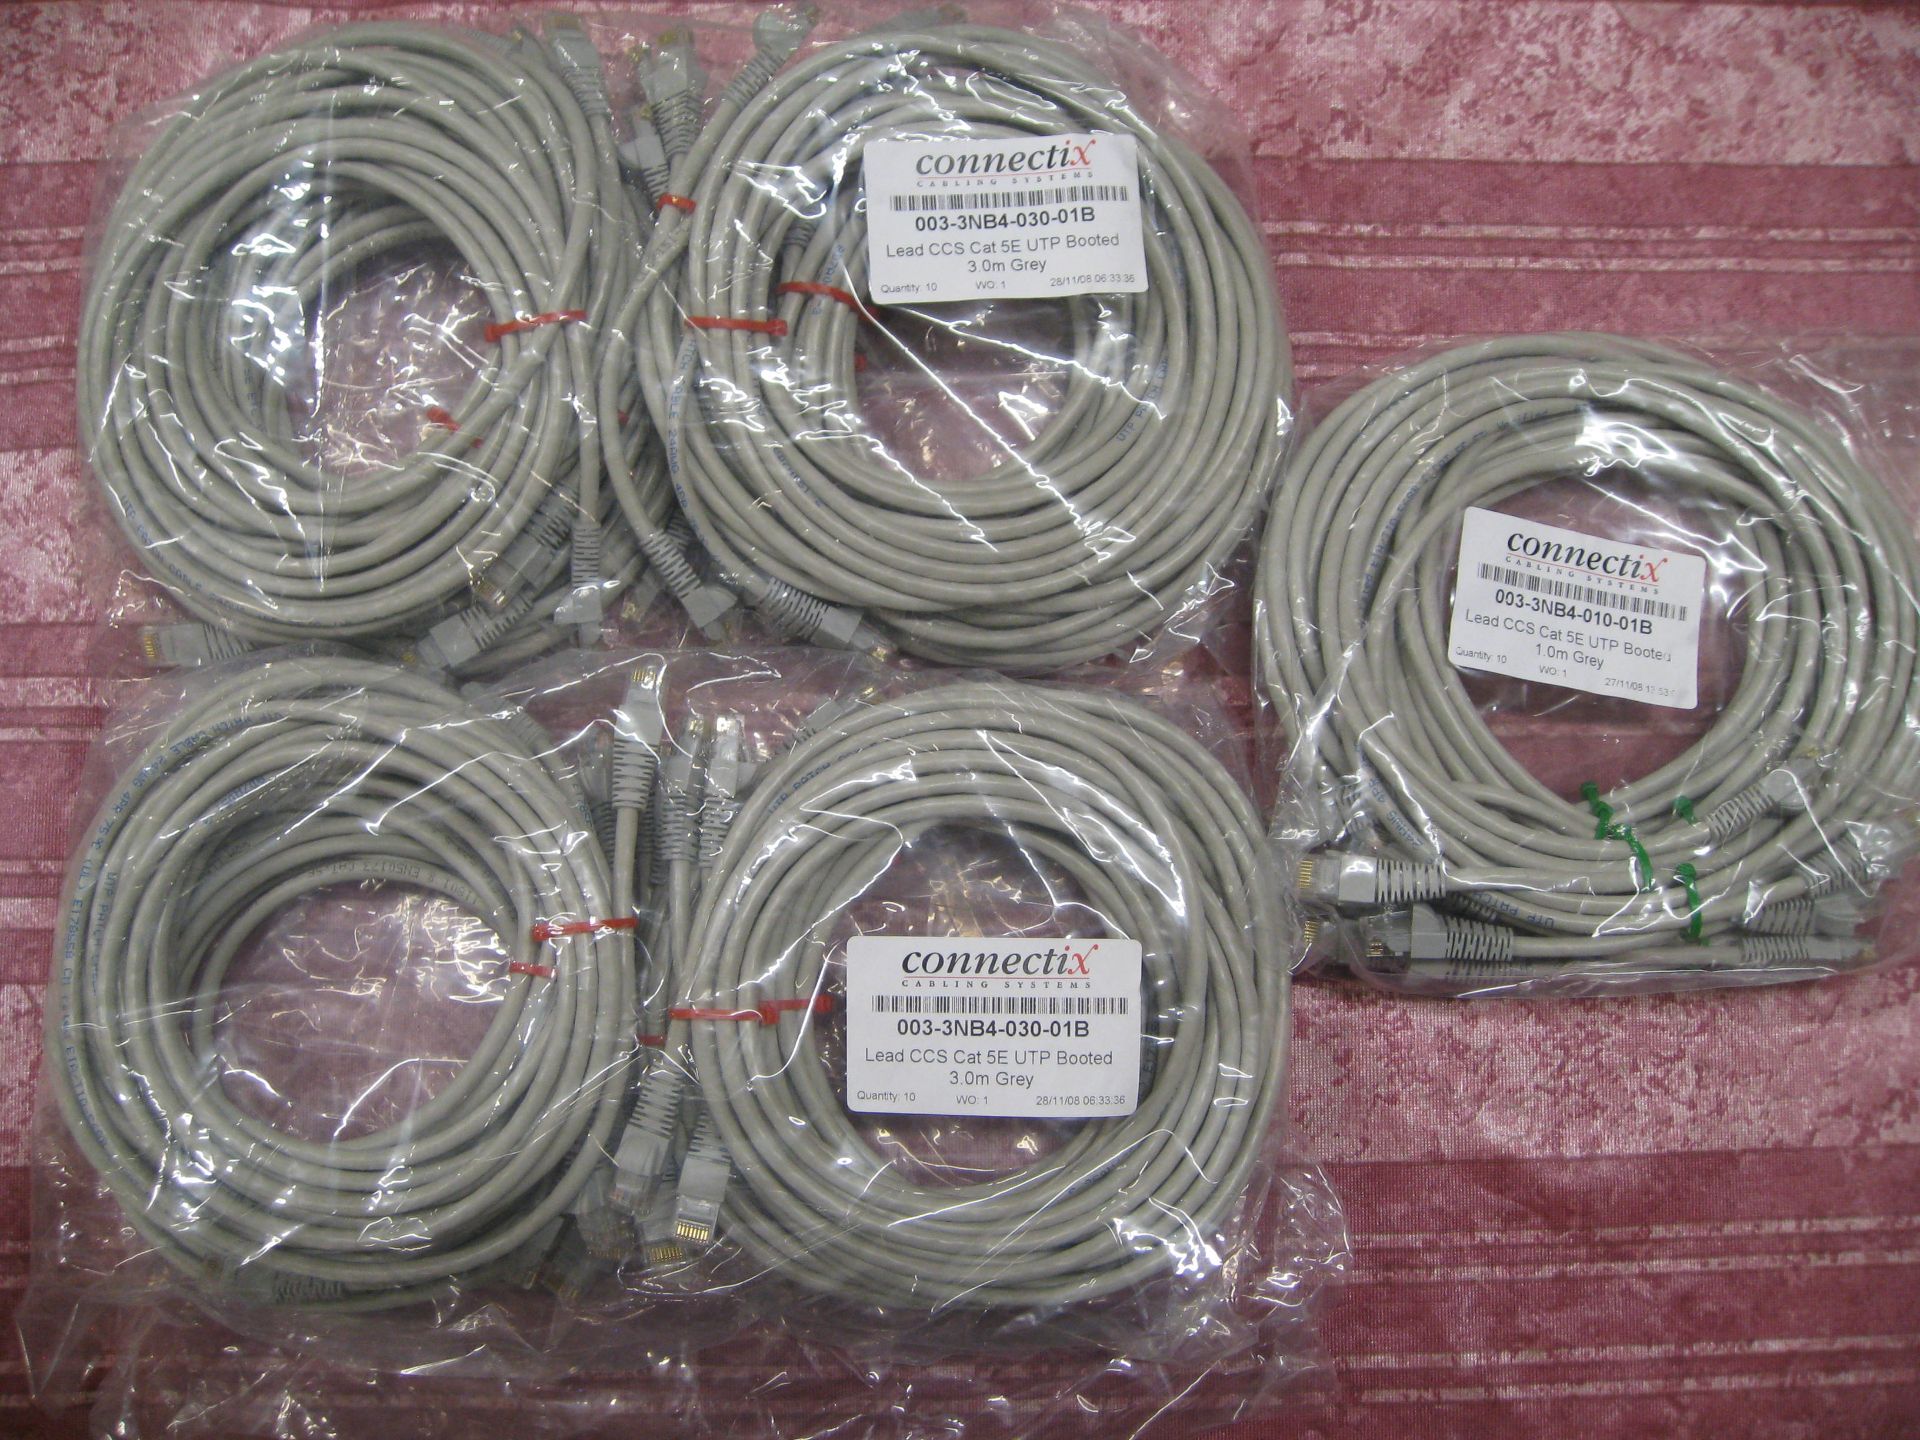 CAT 5 CABLE. 20 X LEAD CCS CAT 5E UTP BOOTED 3.0M GREY & 10 X LEAD CCS CAT 5E UTP BOOTED 1.0M GREY